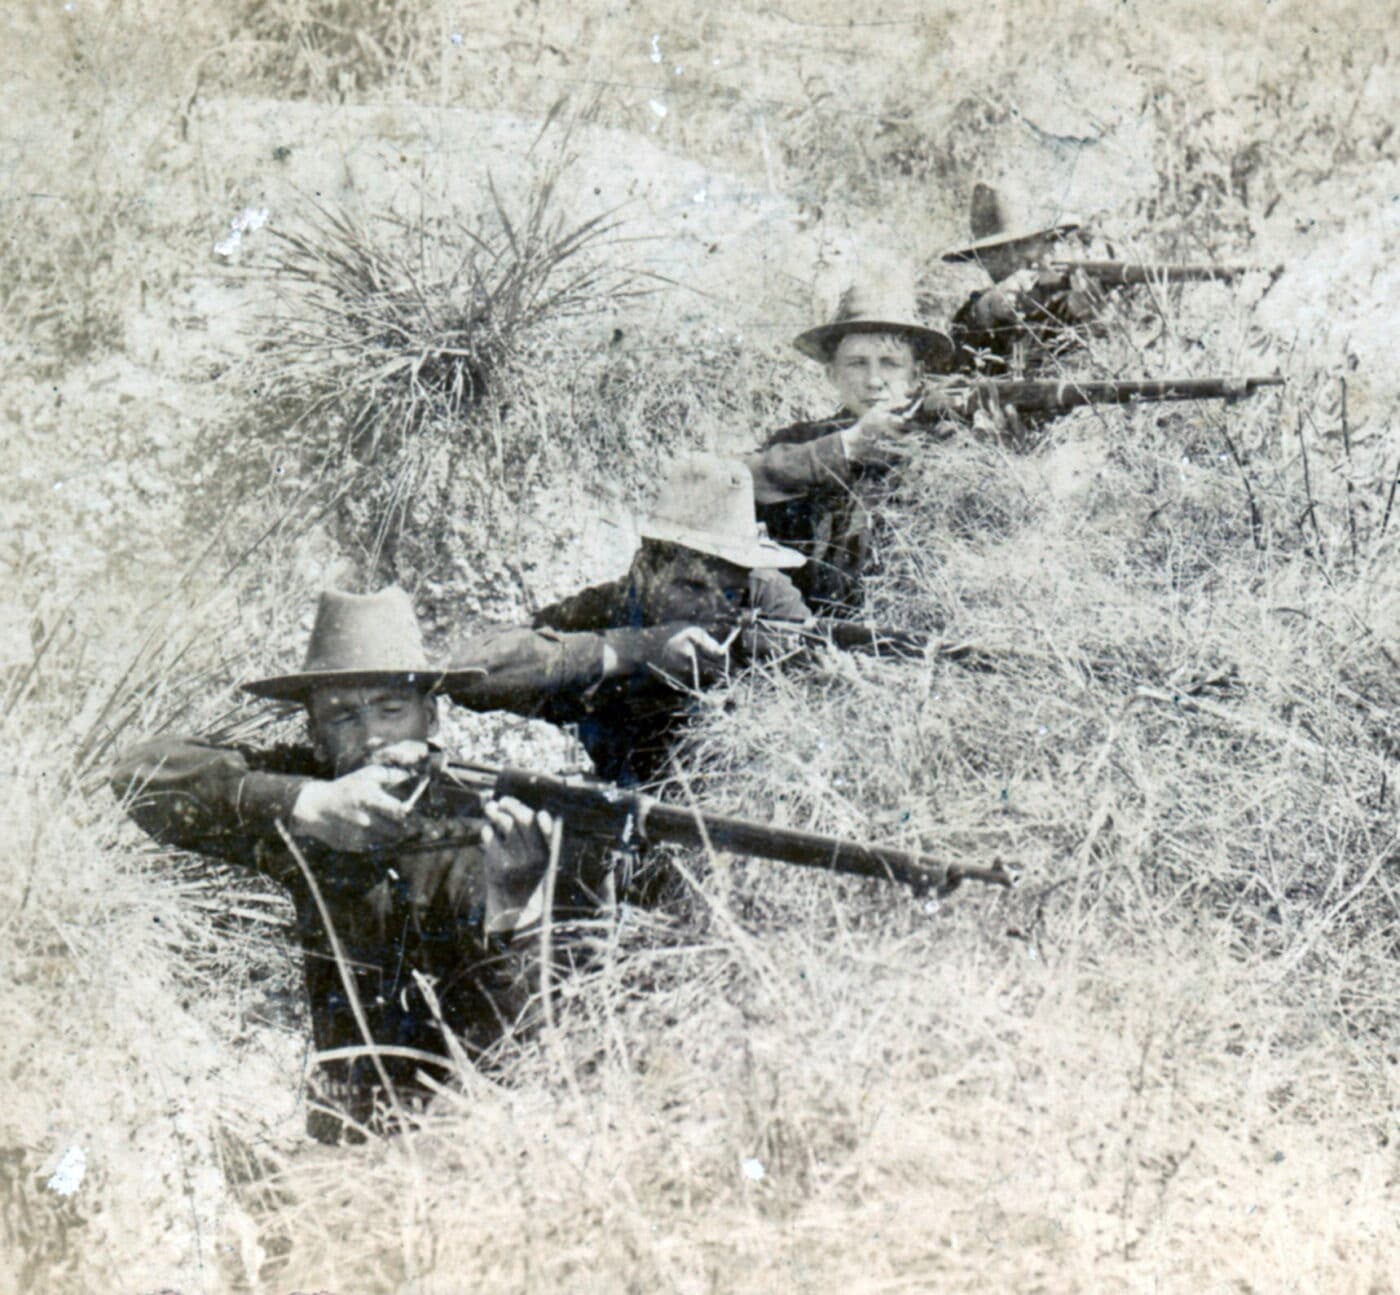 Soldiers using Krag Jorg rifles in action during the Spanish-American War